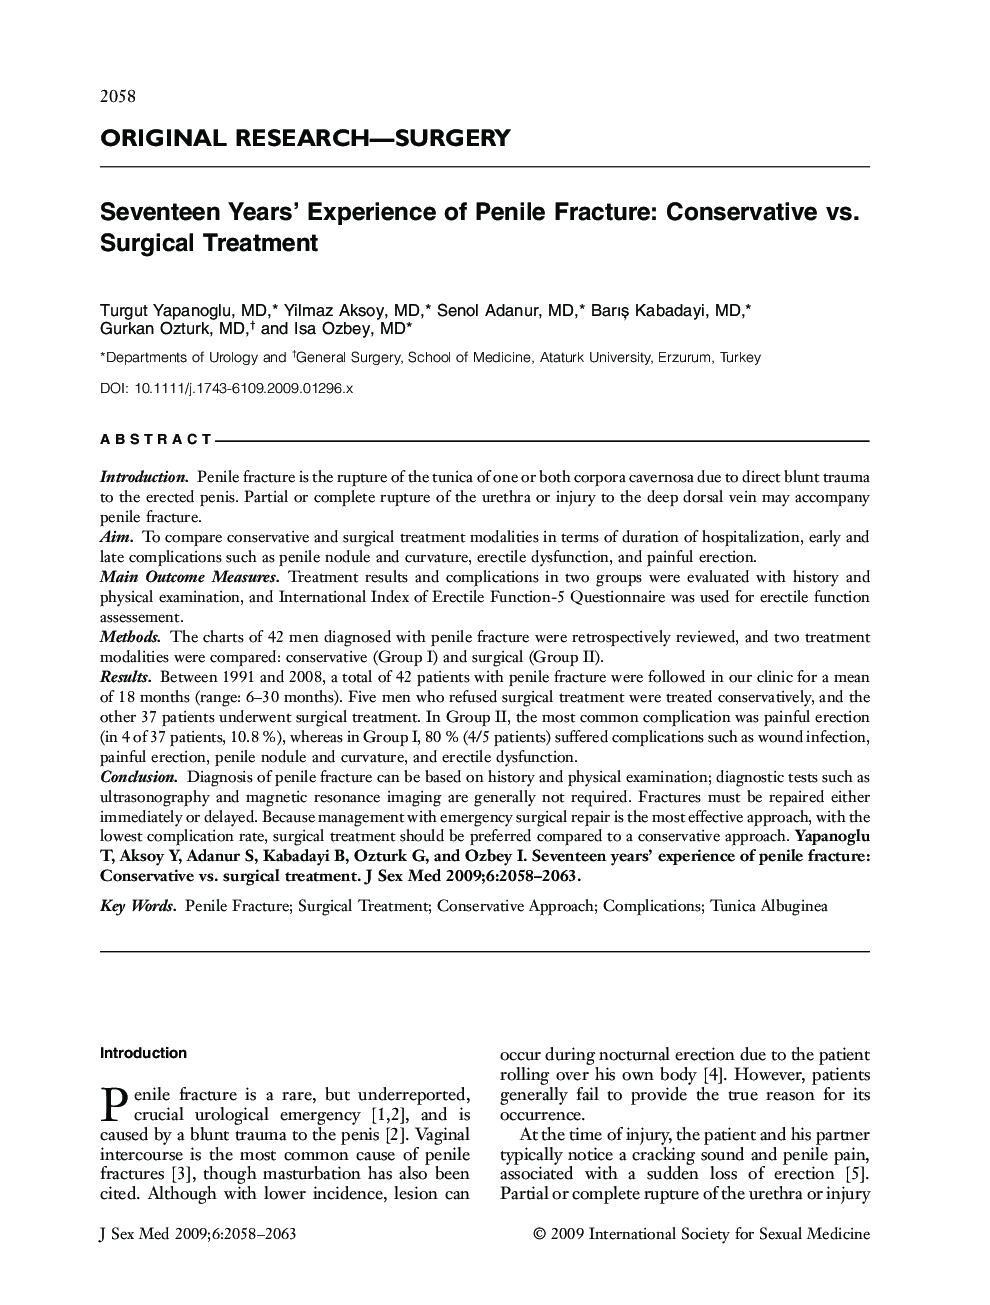 ORIGINAL RESEARCH-SURGERY: Seventeen Years' Experience of Penile Fracture: Conservative vs. Surgical Treatment